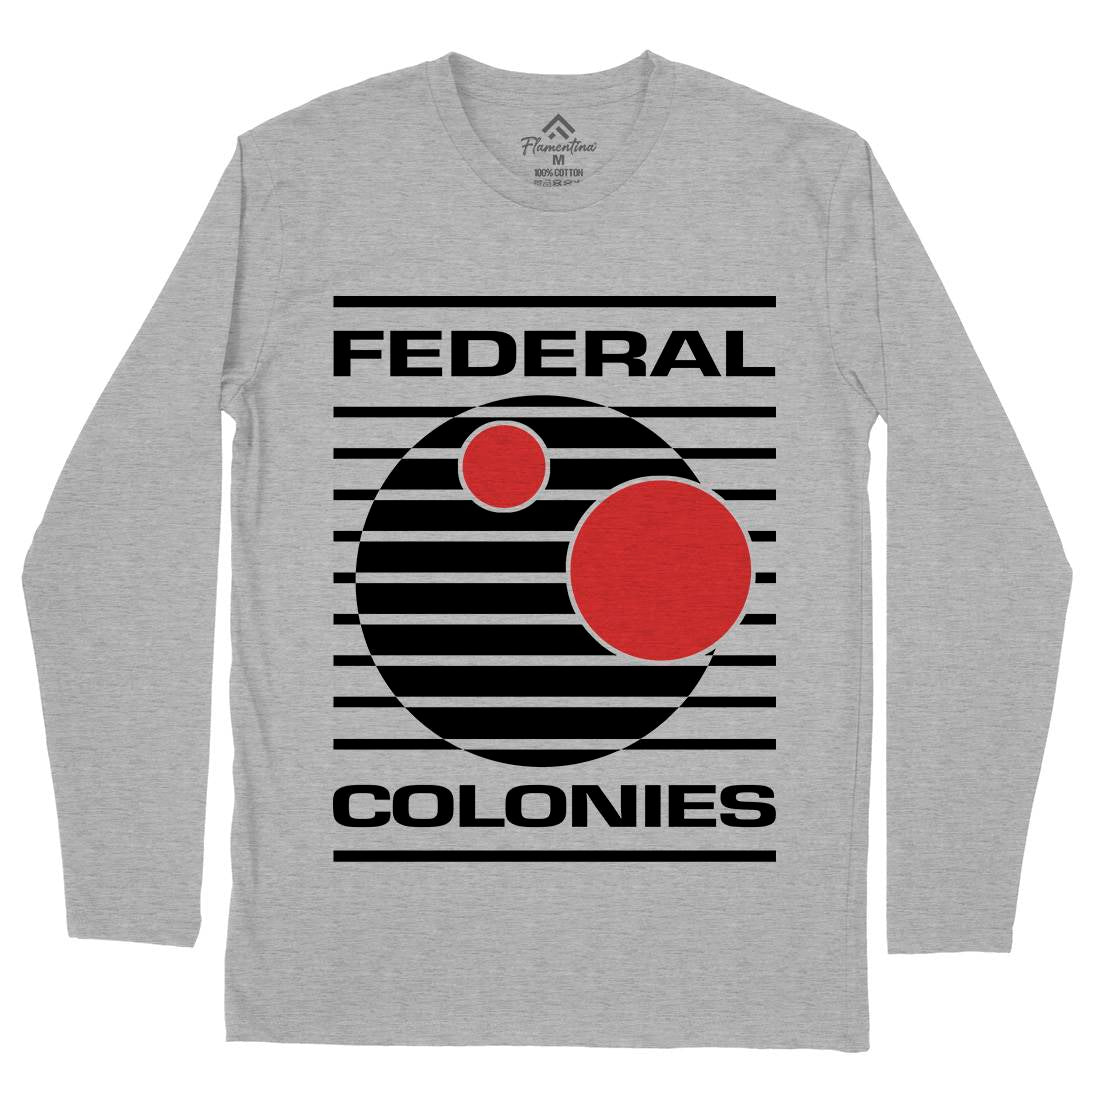 Federal Colonies Mens Long Sleeve T-Shirt Space D409